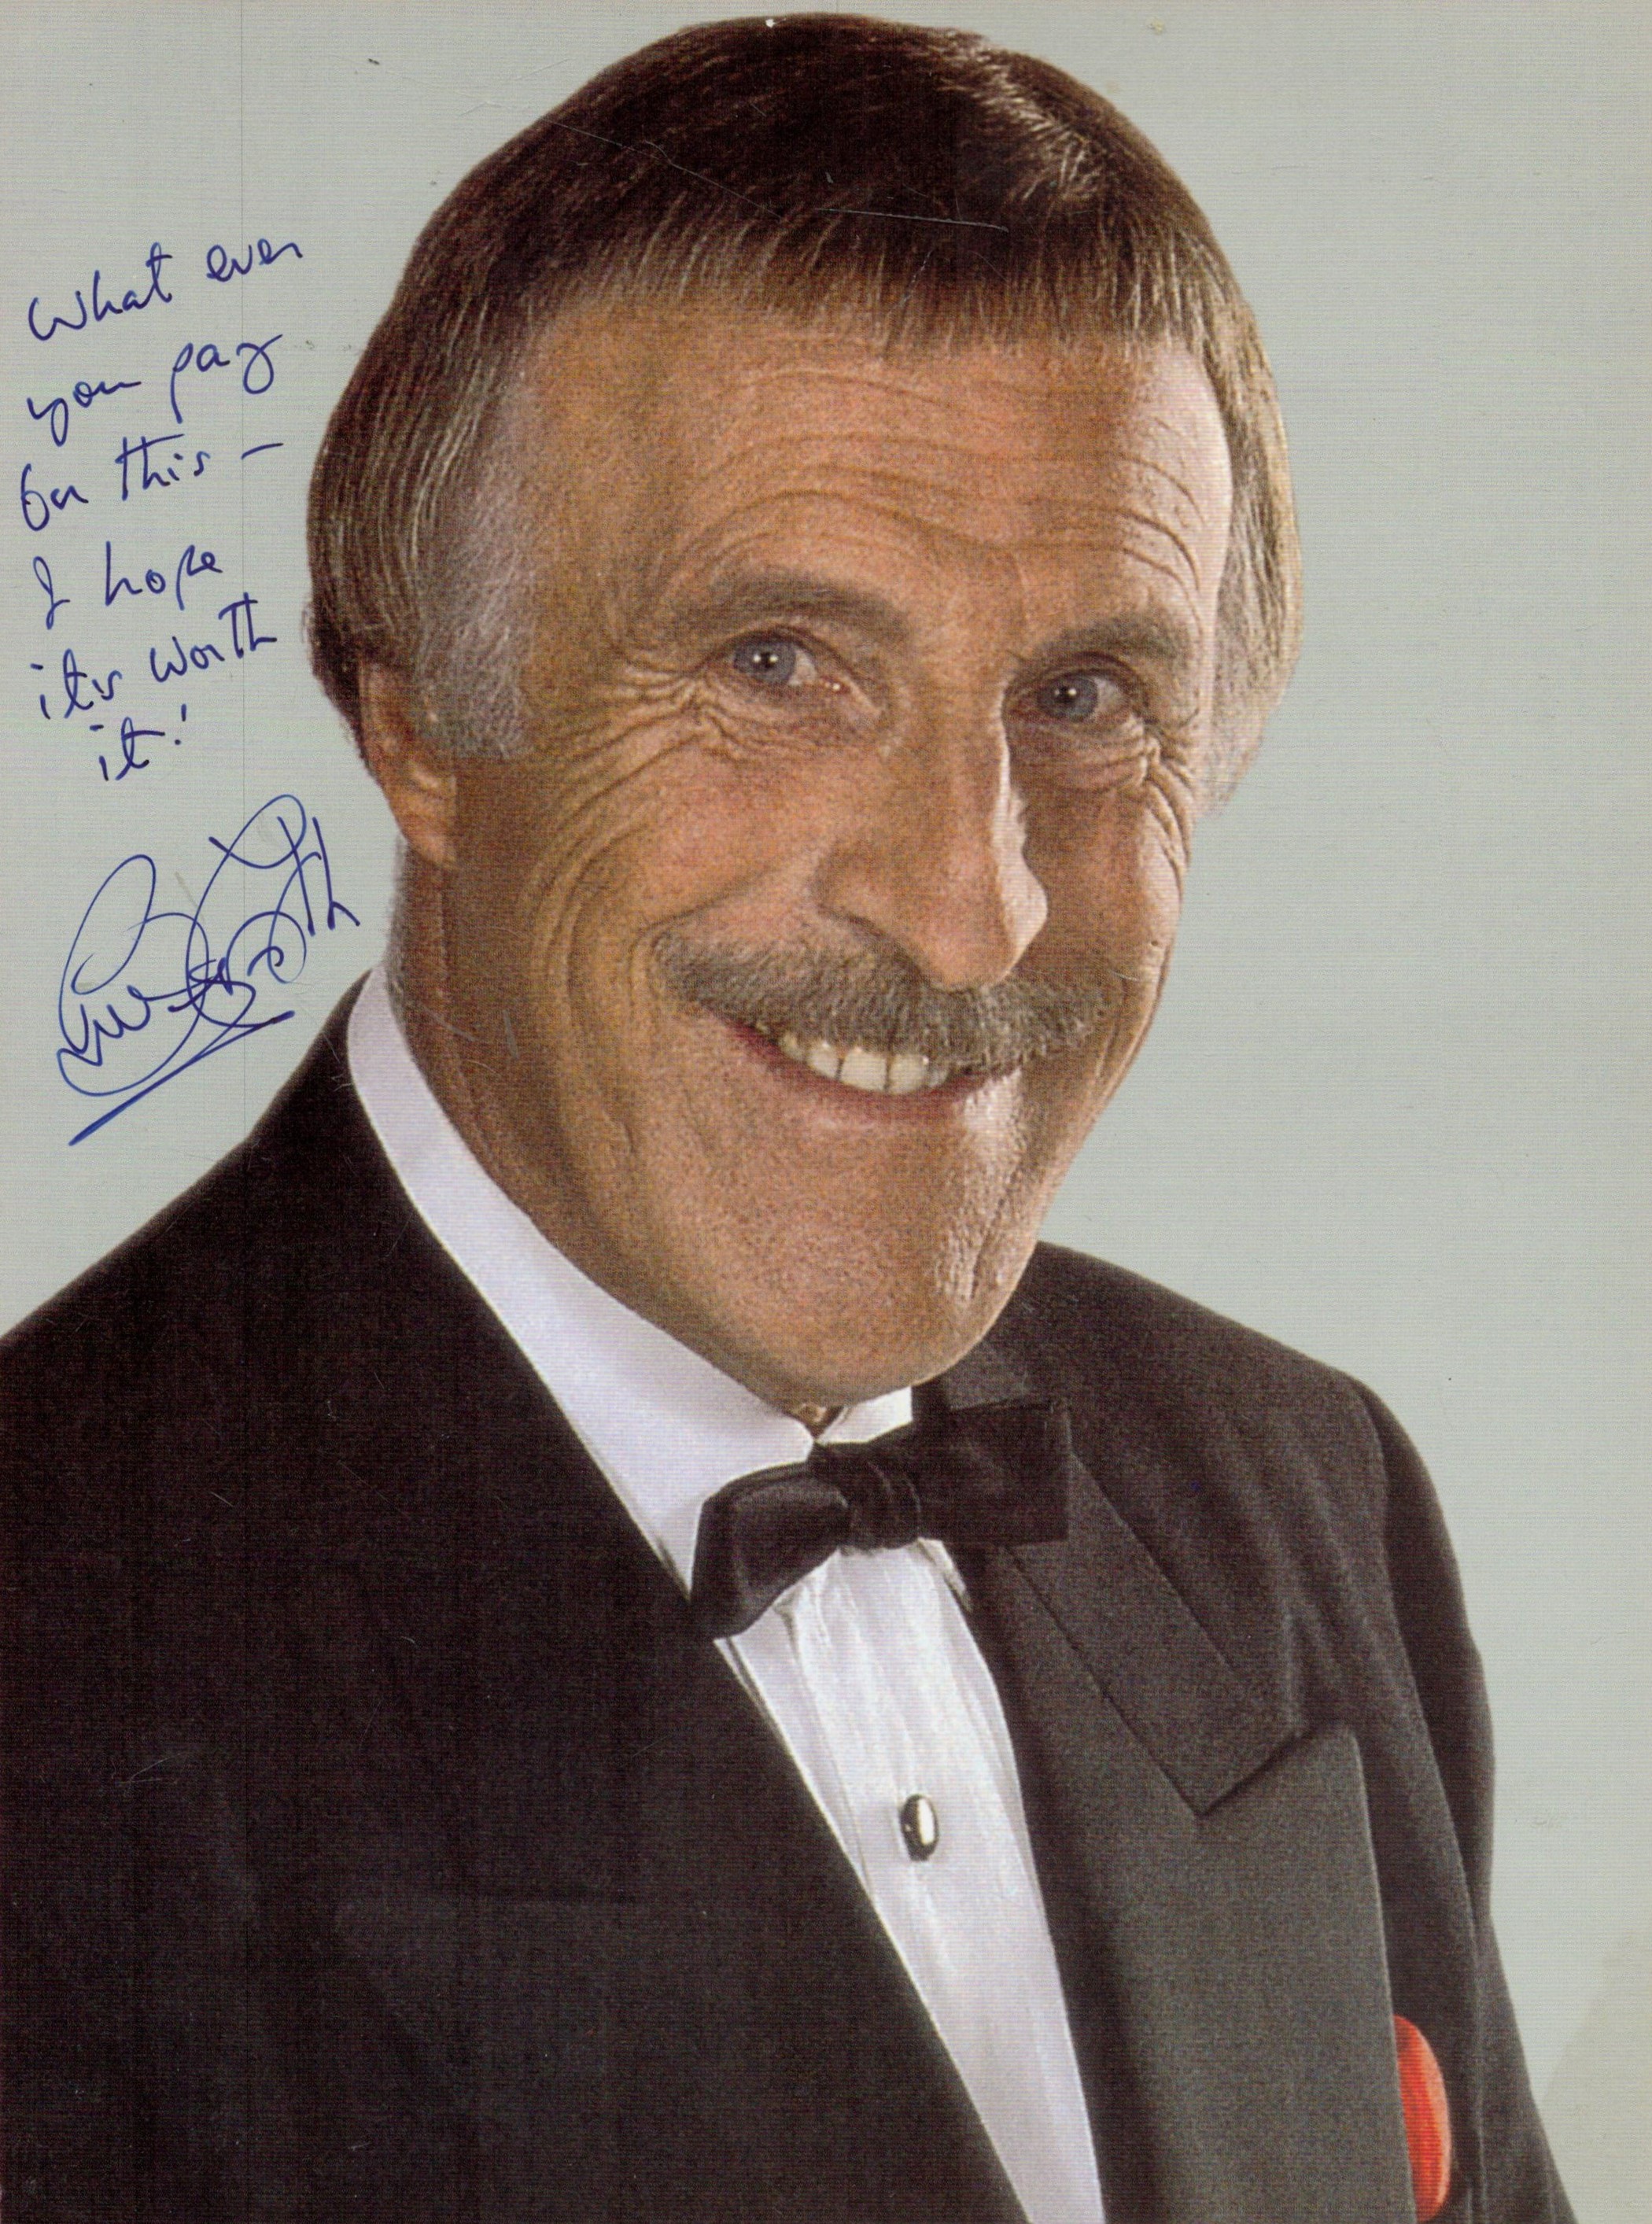 British TV Icon Bruce Forsyth Signed 10x8 inch Colour Photo with Humorous Inscription. Good